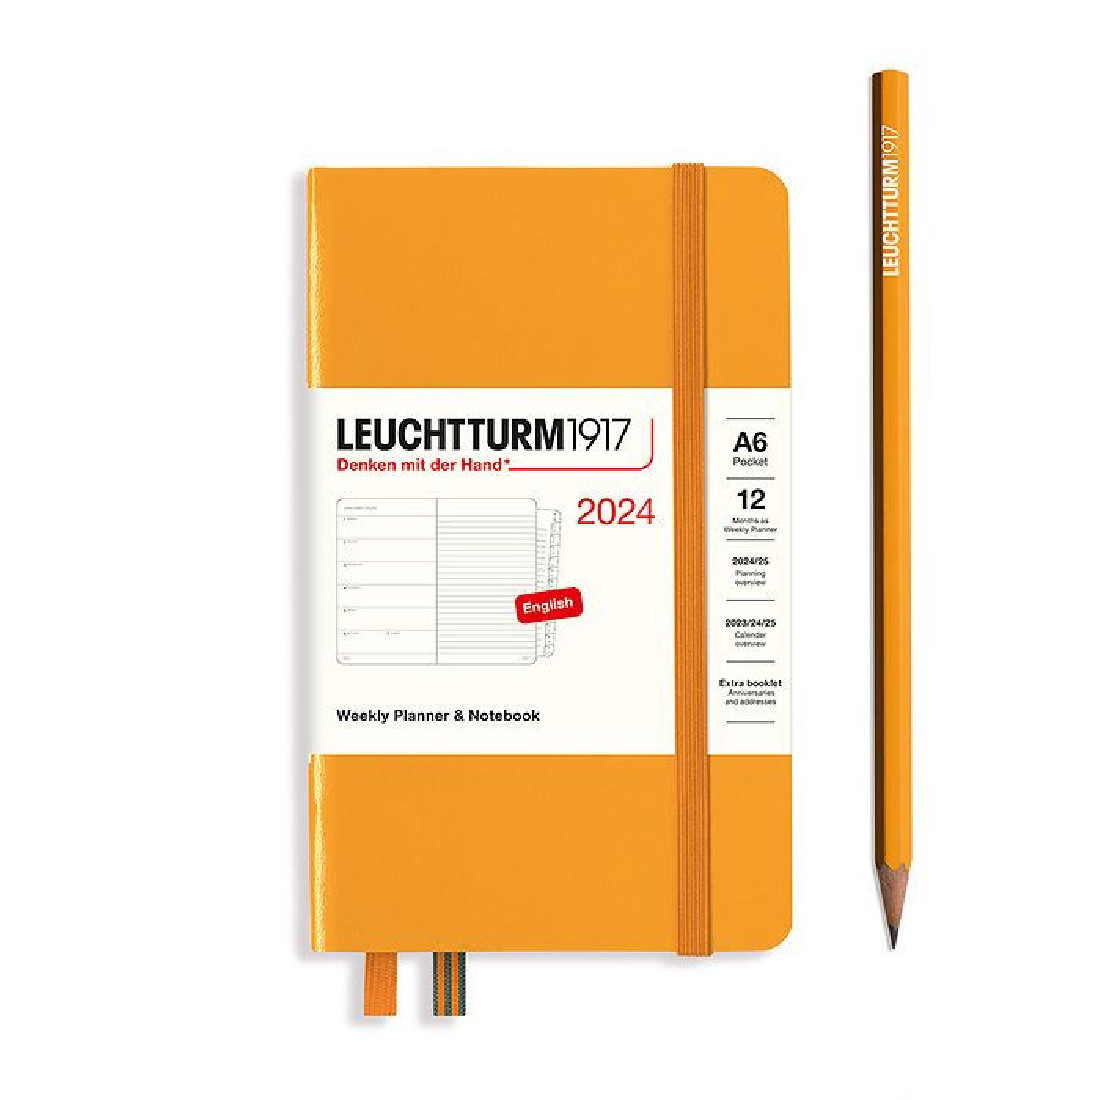 Leuchtturm 1917 Weekly Planner and Notebook 2024 Rising Sun Pocket A6 Hard Cover